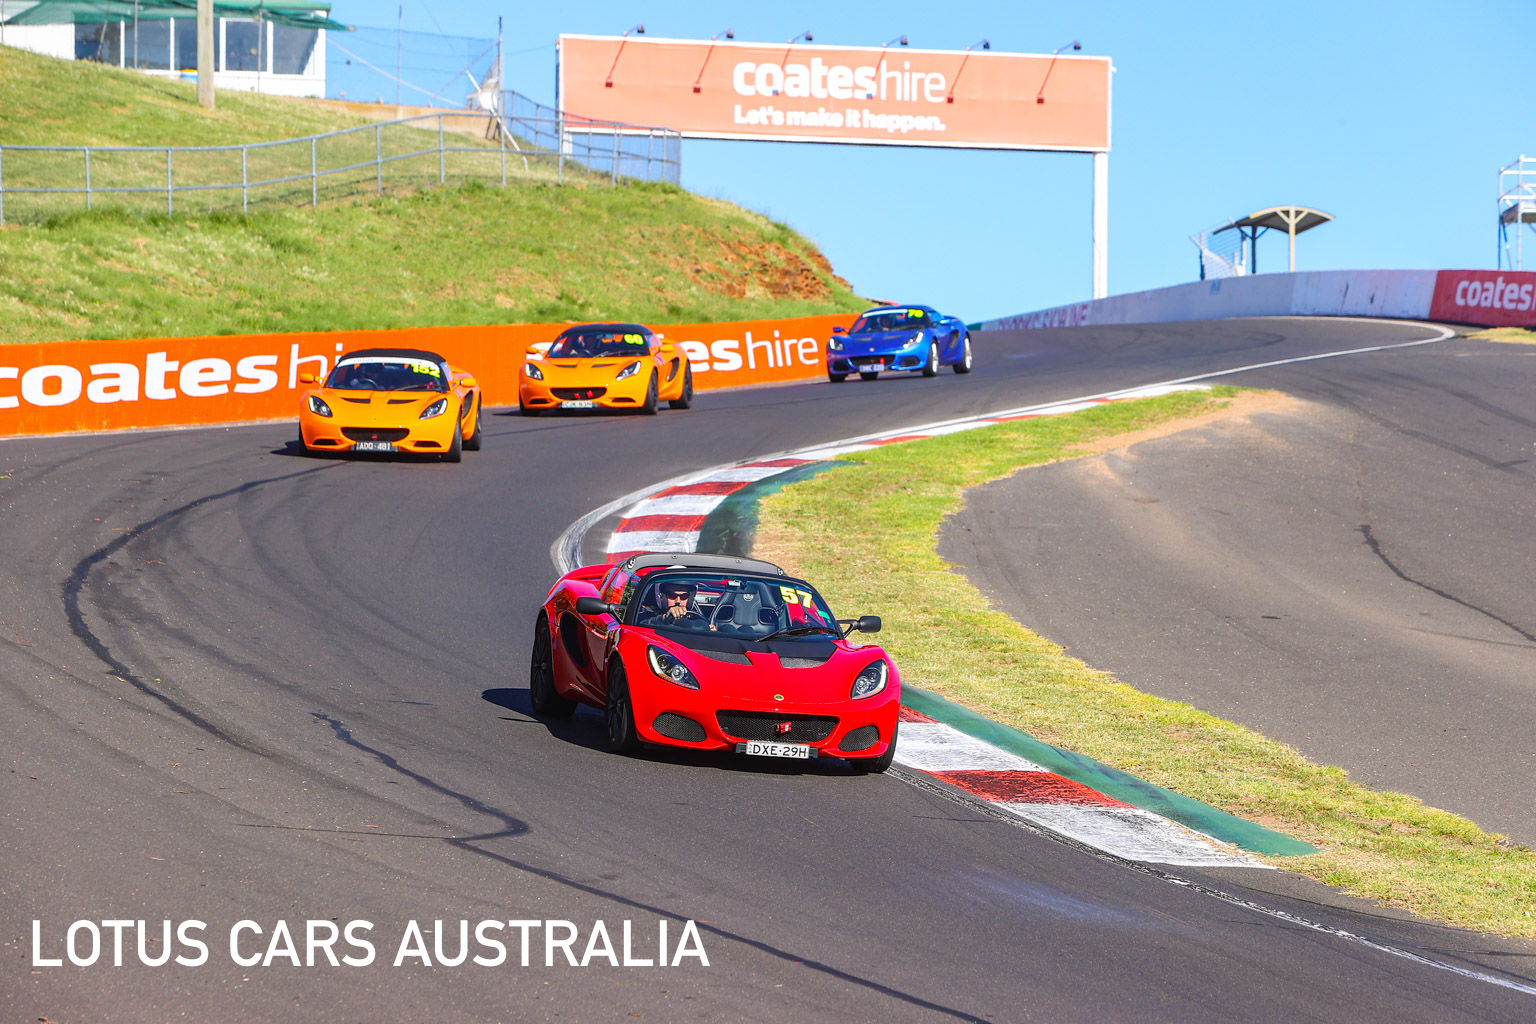 Lotus Cars Australia Mount Panorama Bathurst Track Day Red Elise Sports Car Down The Esses March 2021 (6 Of 45)